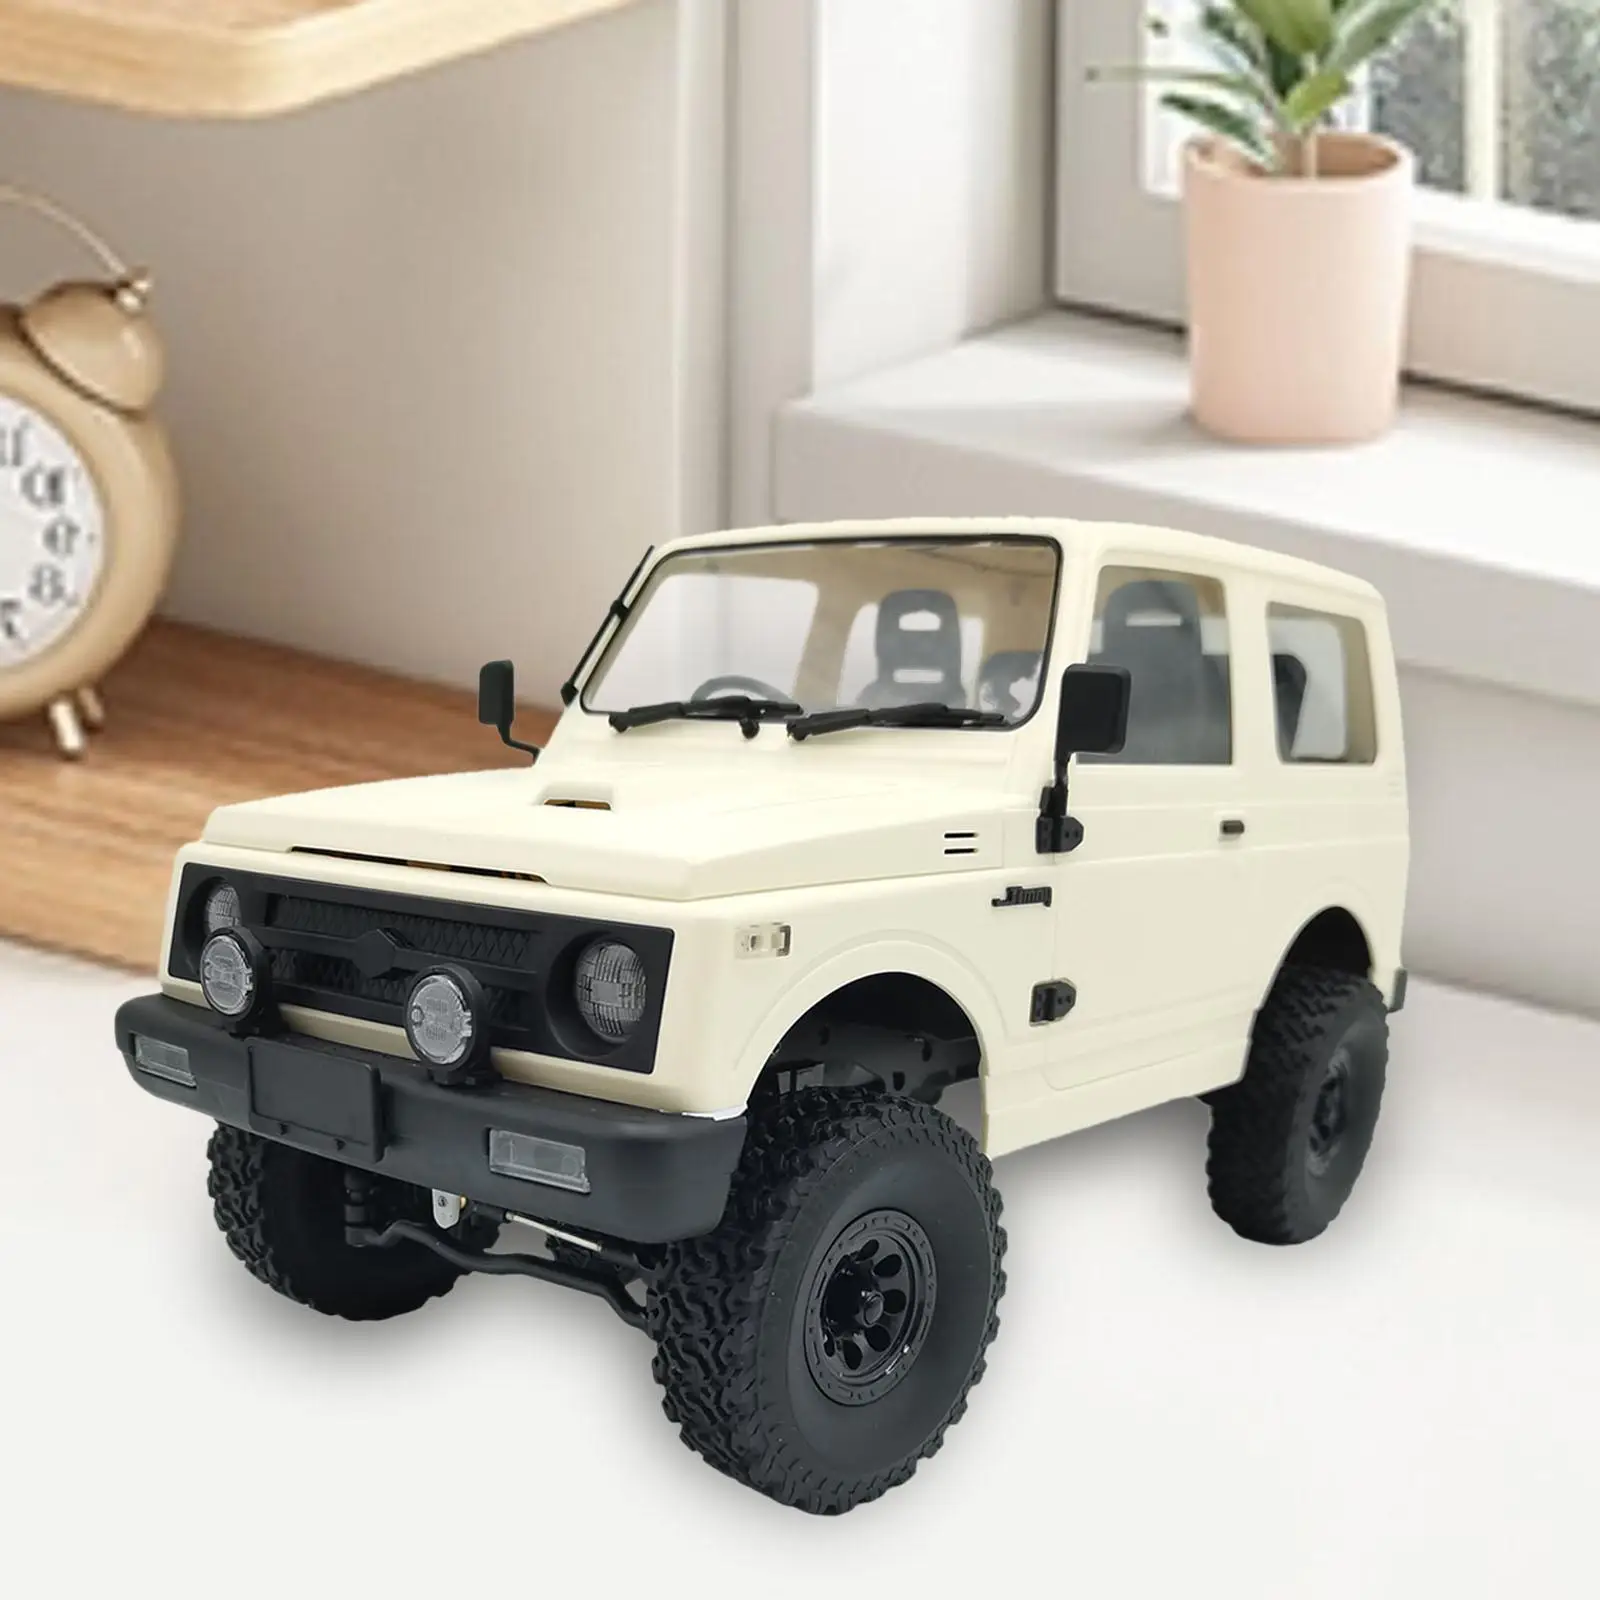 1/10 WL01 RC Car Toy 4WD C74 Remote Control Electric Toy Simulation Climbing Truck for Children Adults Boy Kid Birthday Gifts